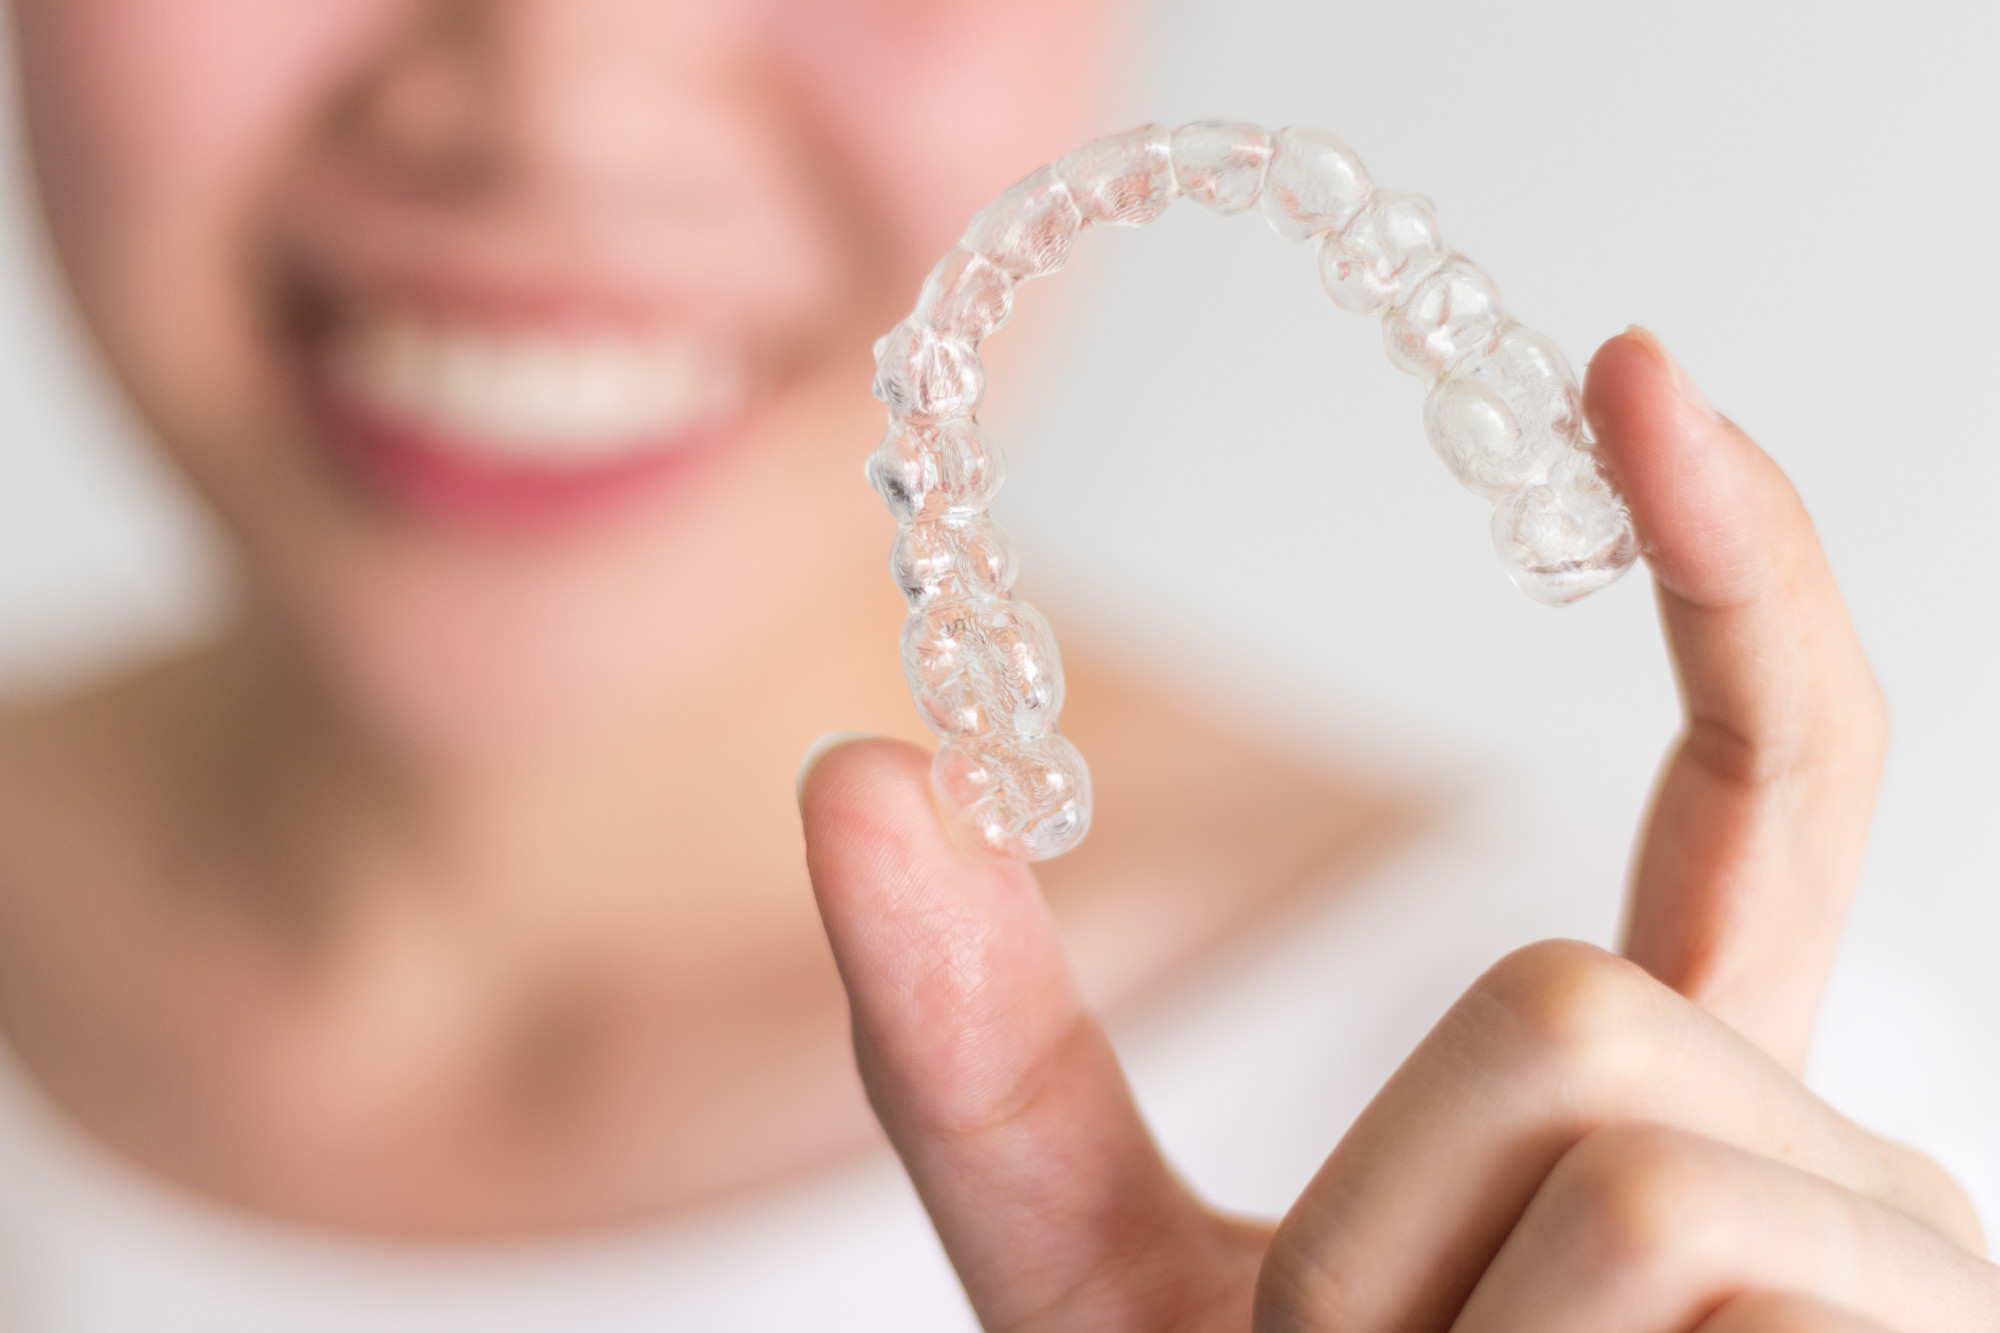 Keeping your Invisalign clean requires knowing what can hinder your progress. Here are common errors in cleaning Invisalign and how to avoid them.